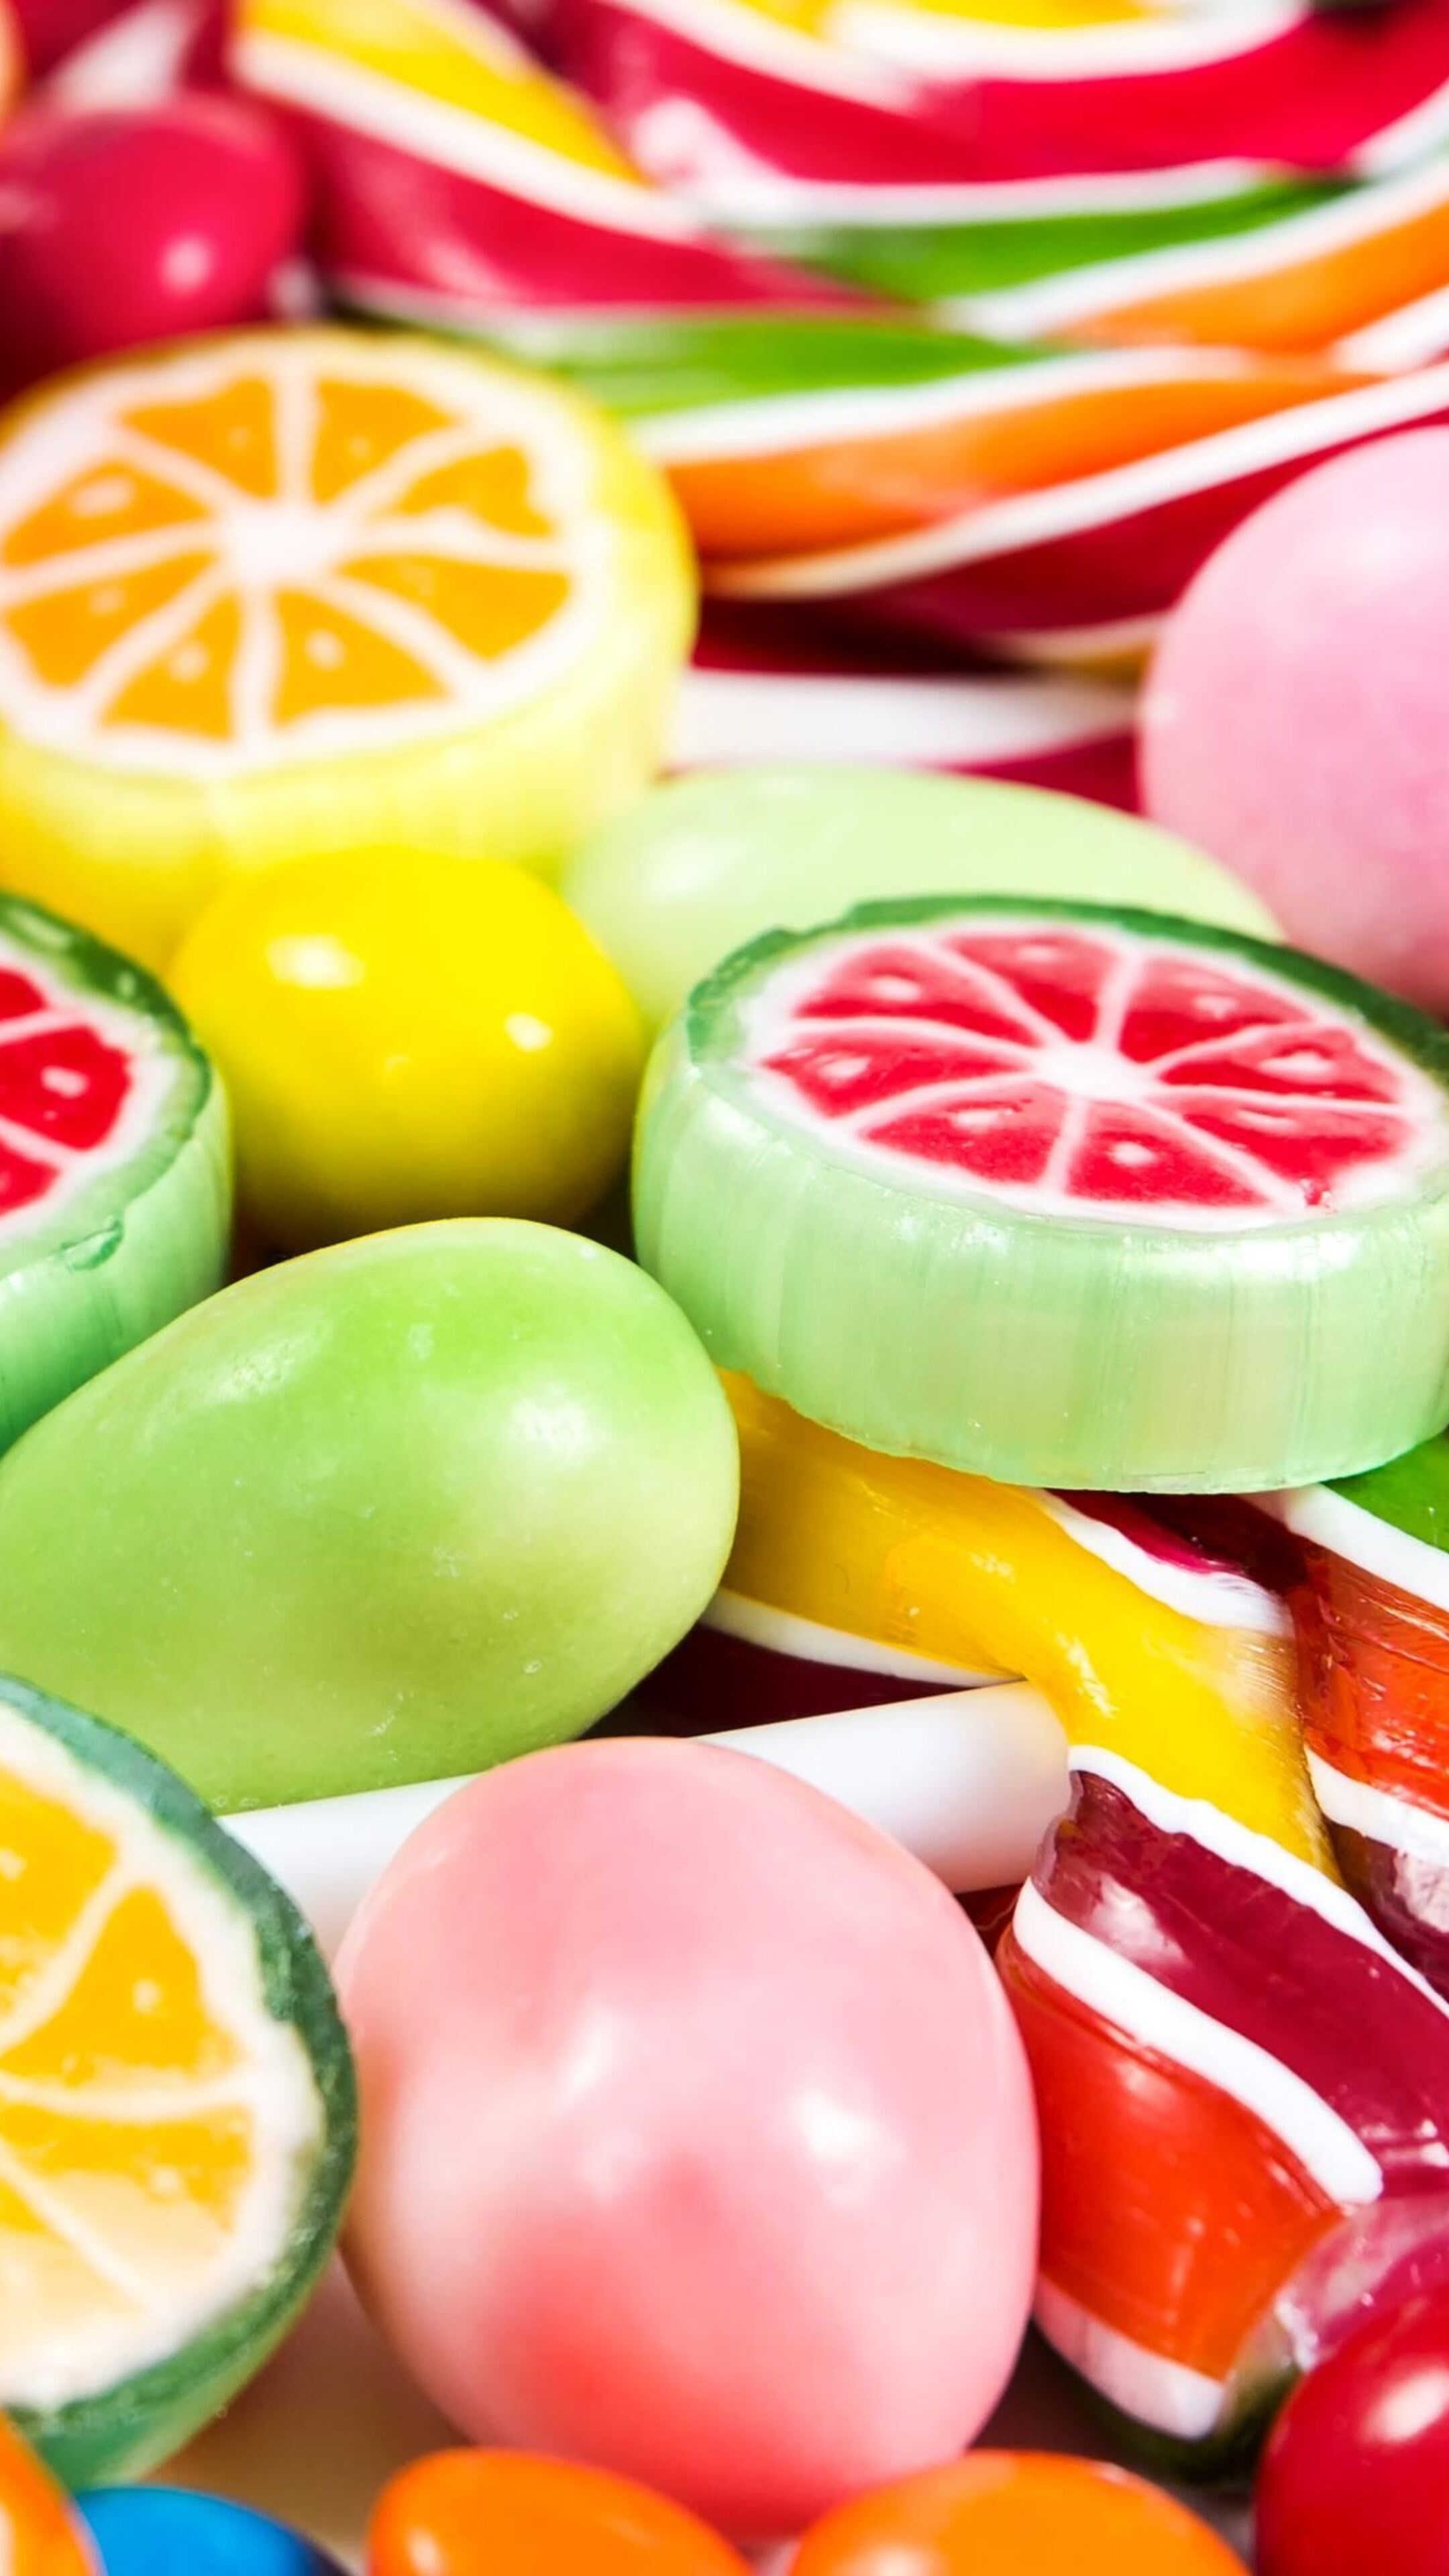 Colorful candy Xperia wallpapers, Stunning HD and 4K images, Eye-catching candy visuals, Vibrant confectionery, 2160x3840 4K Handy